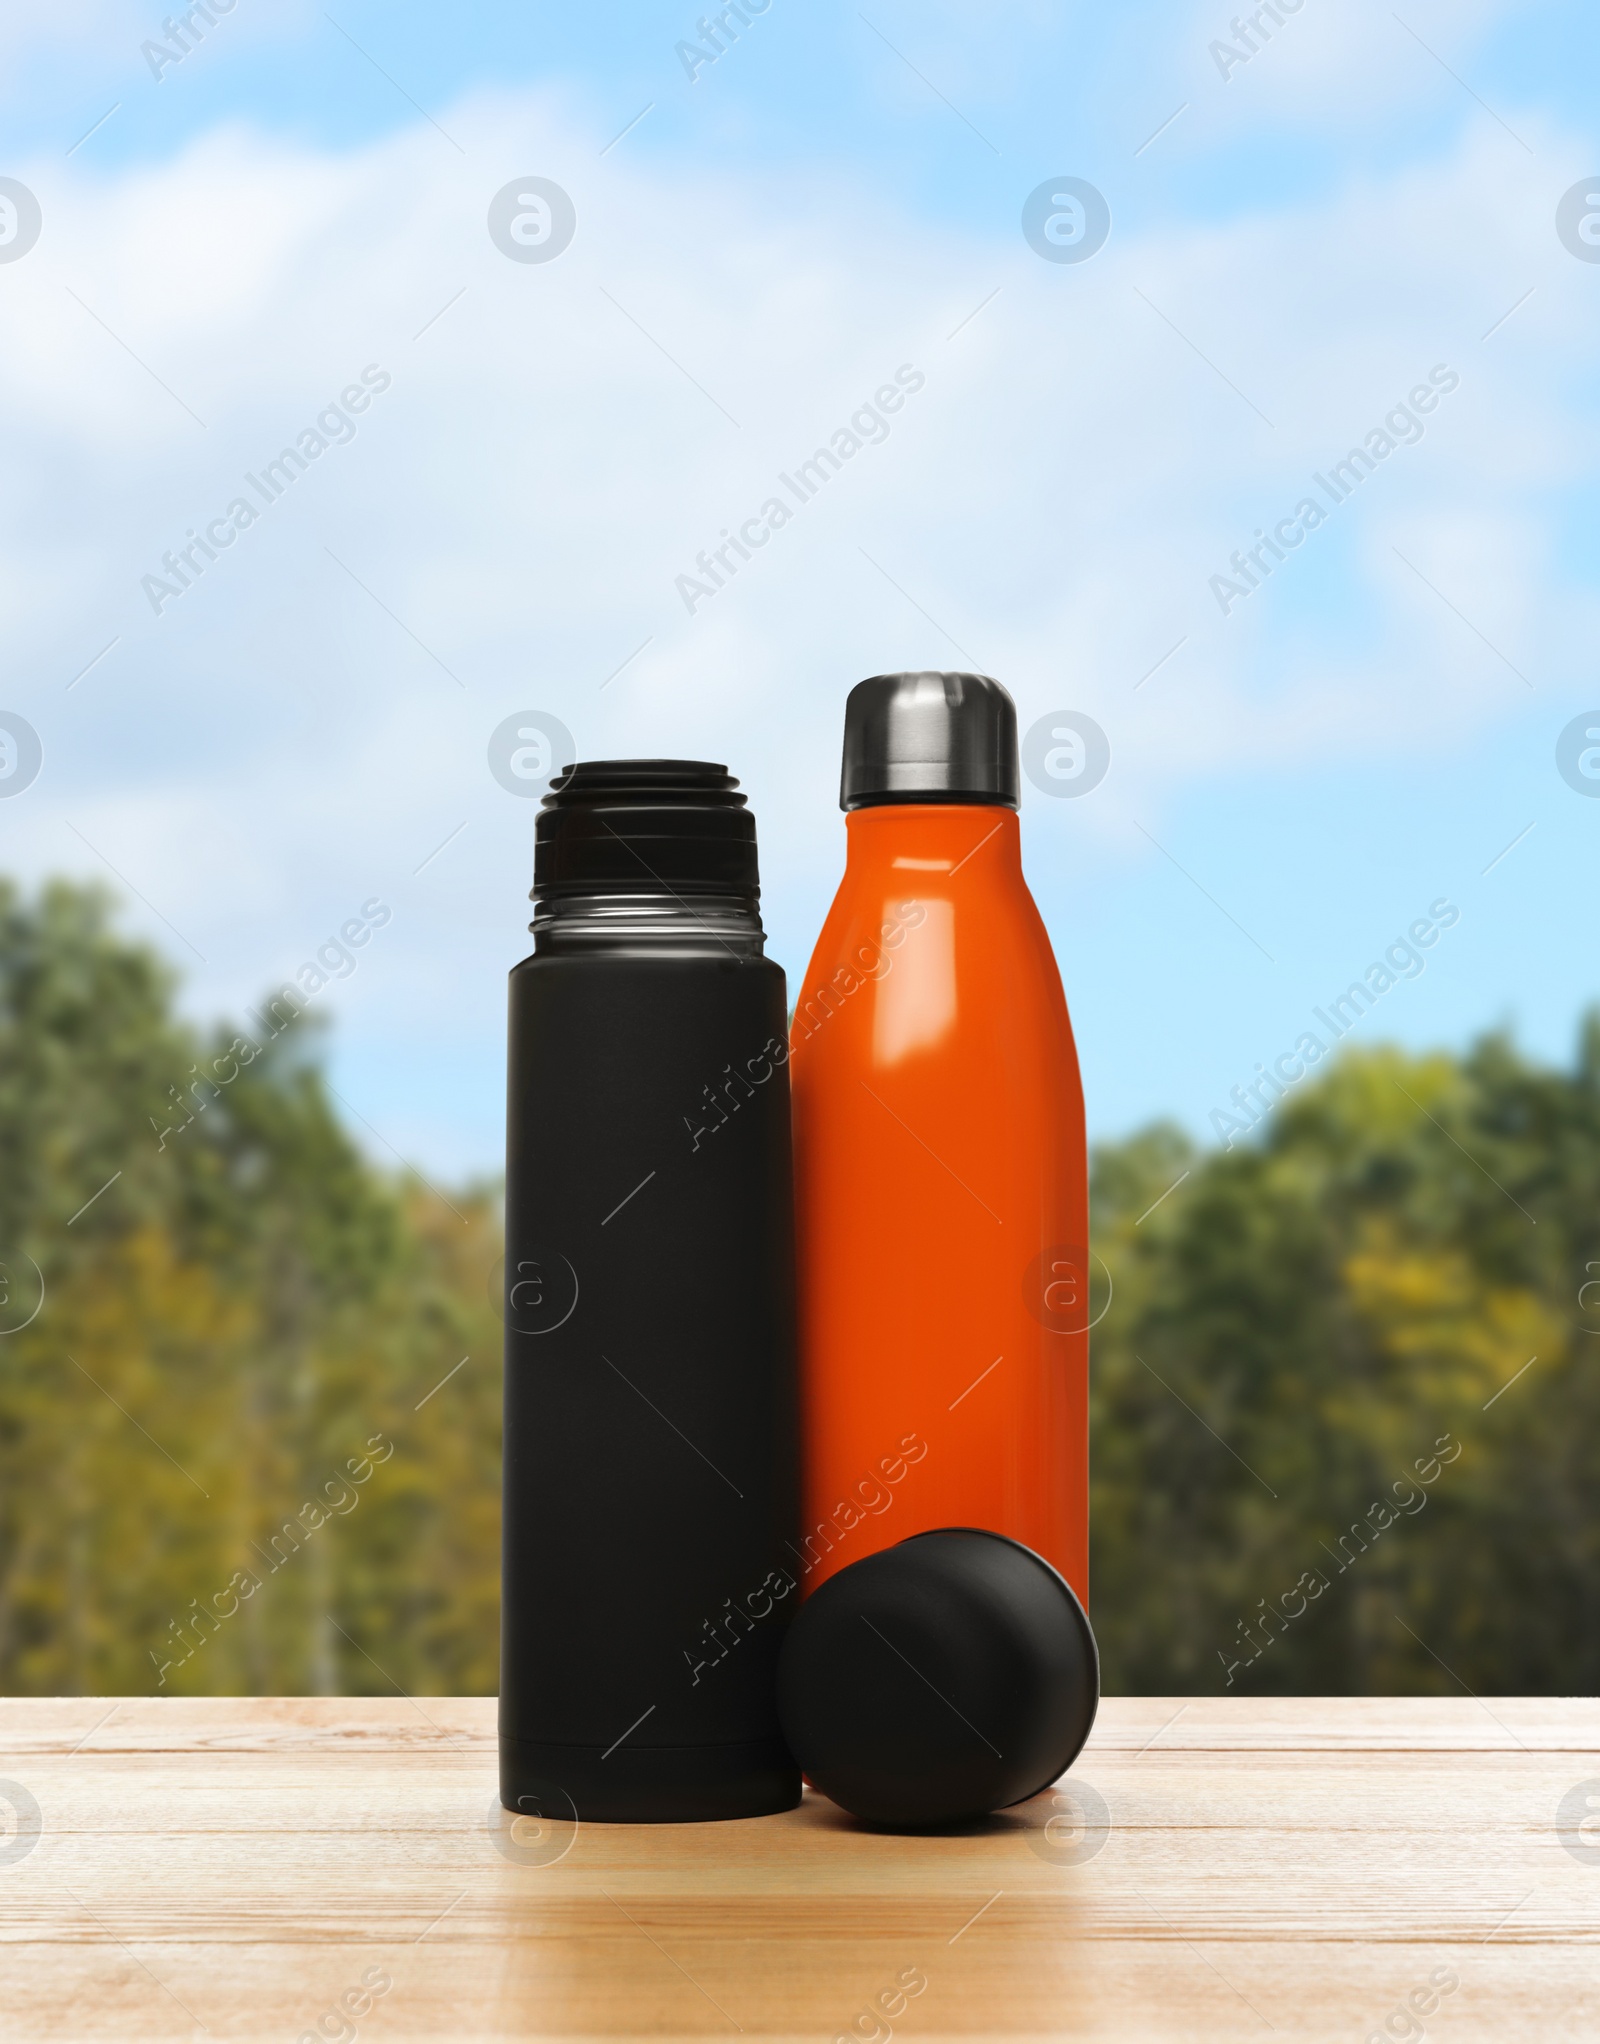 Image of Thermos bottles on wooden table against blurred forest